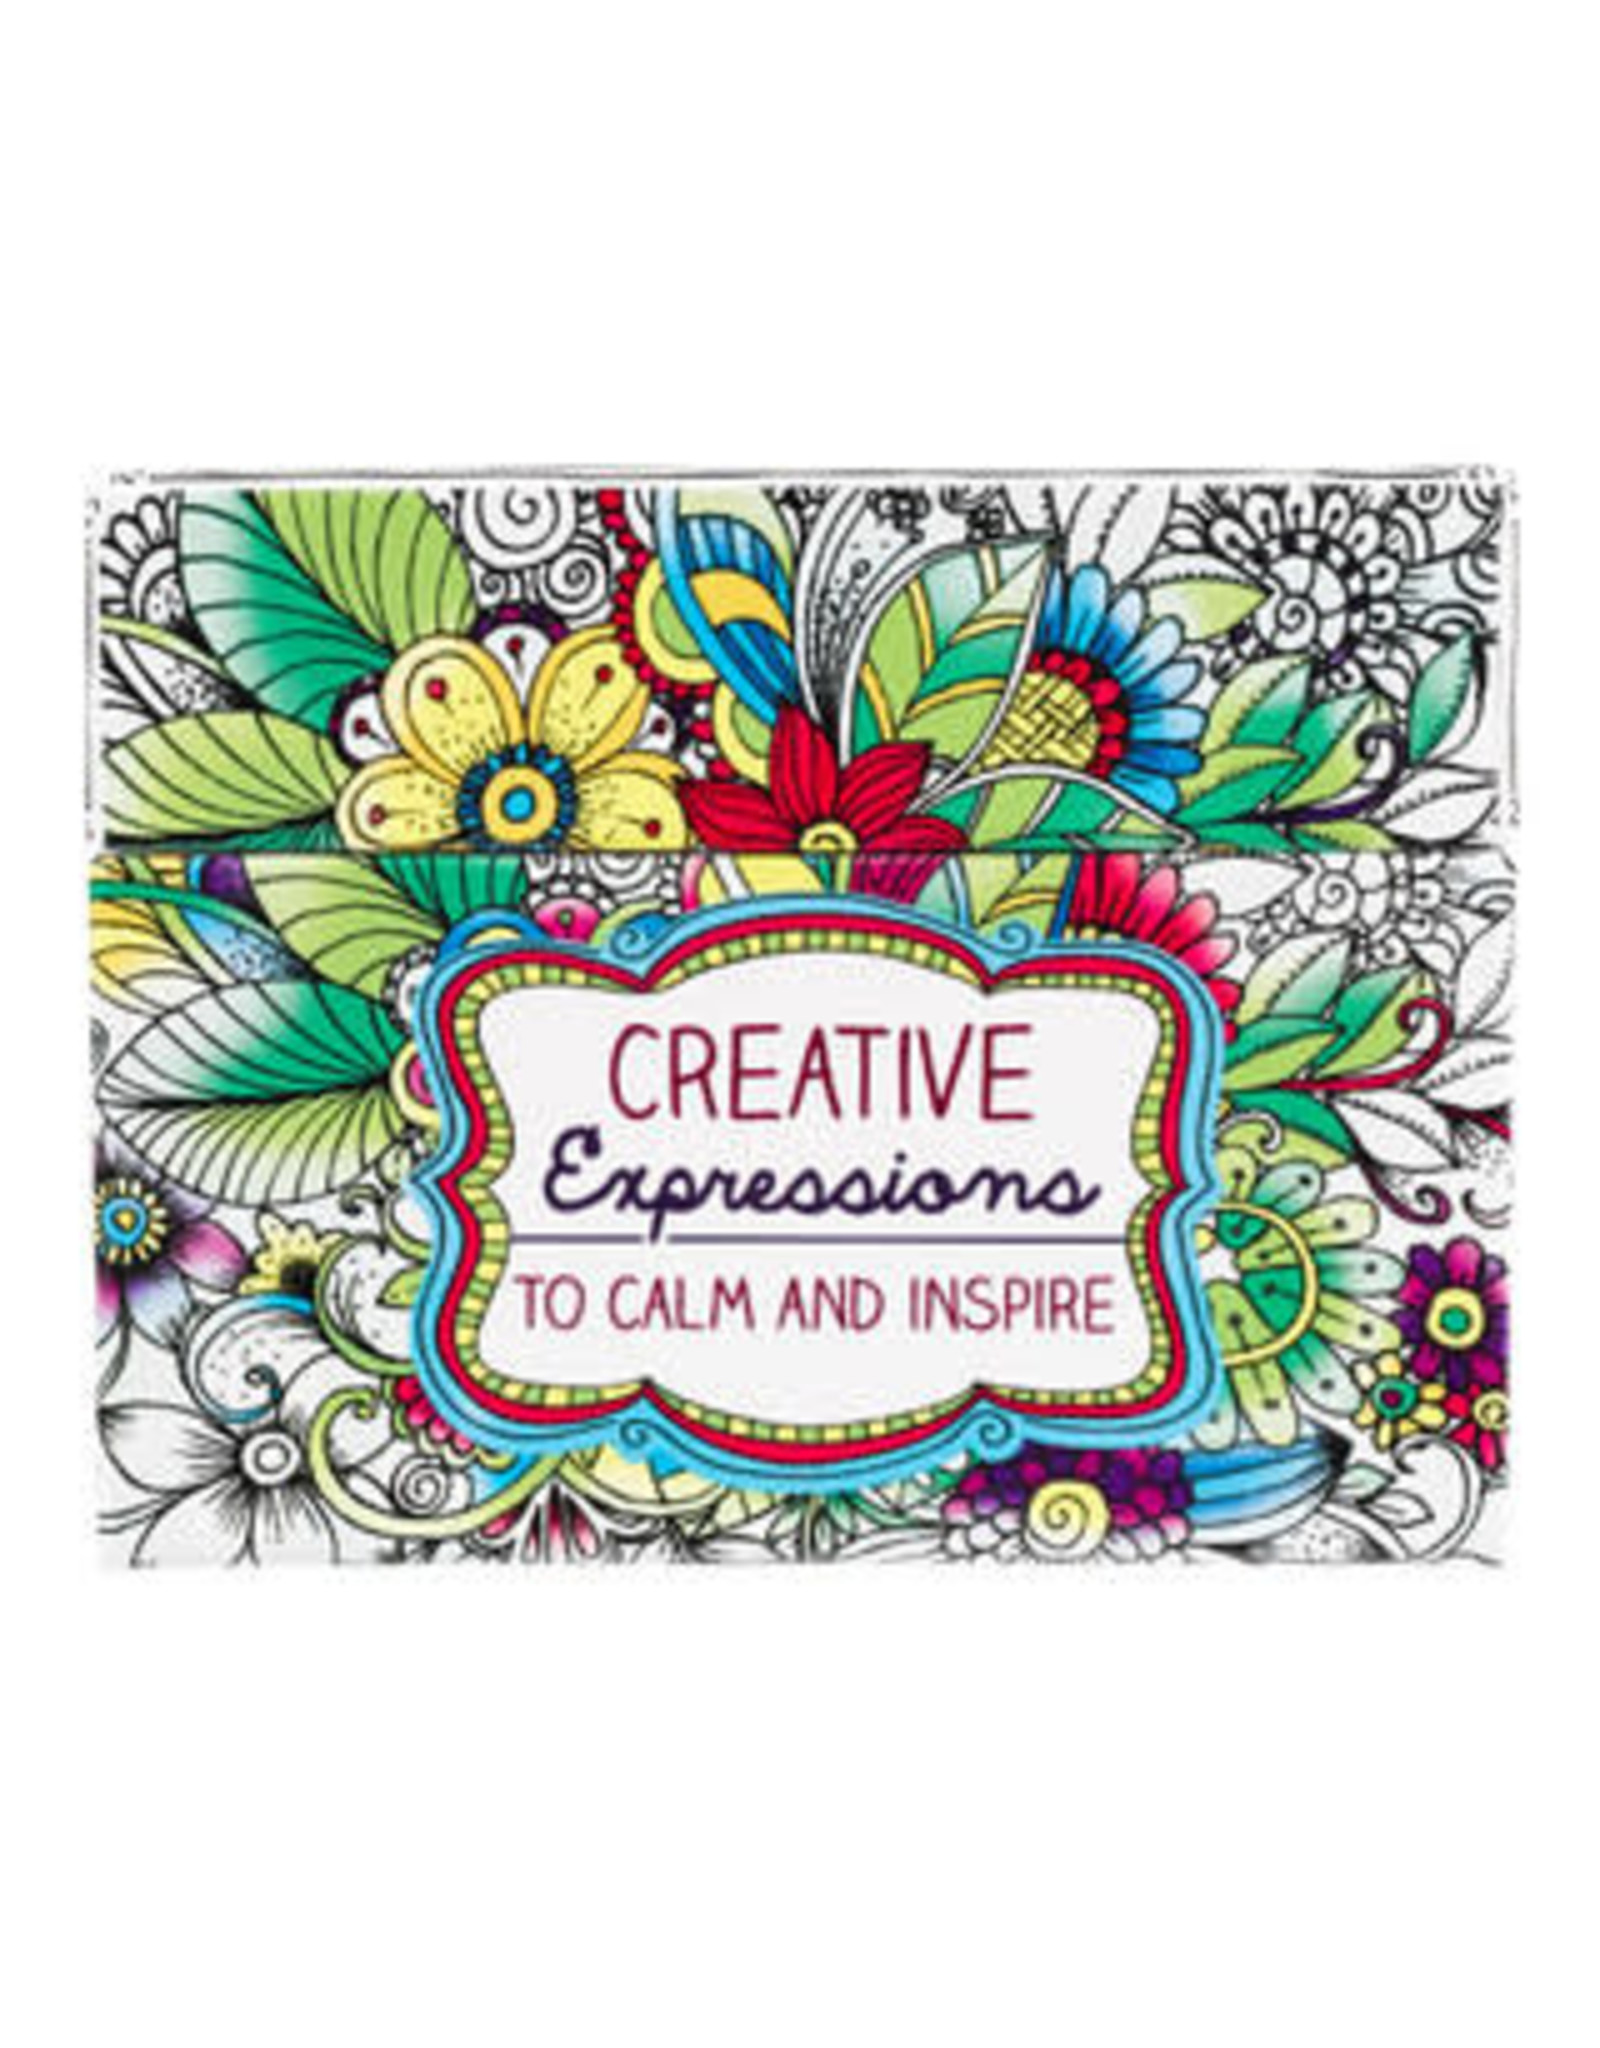 Christian Art Gifts Creative Expressions Coloring Cards